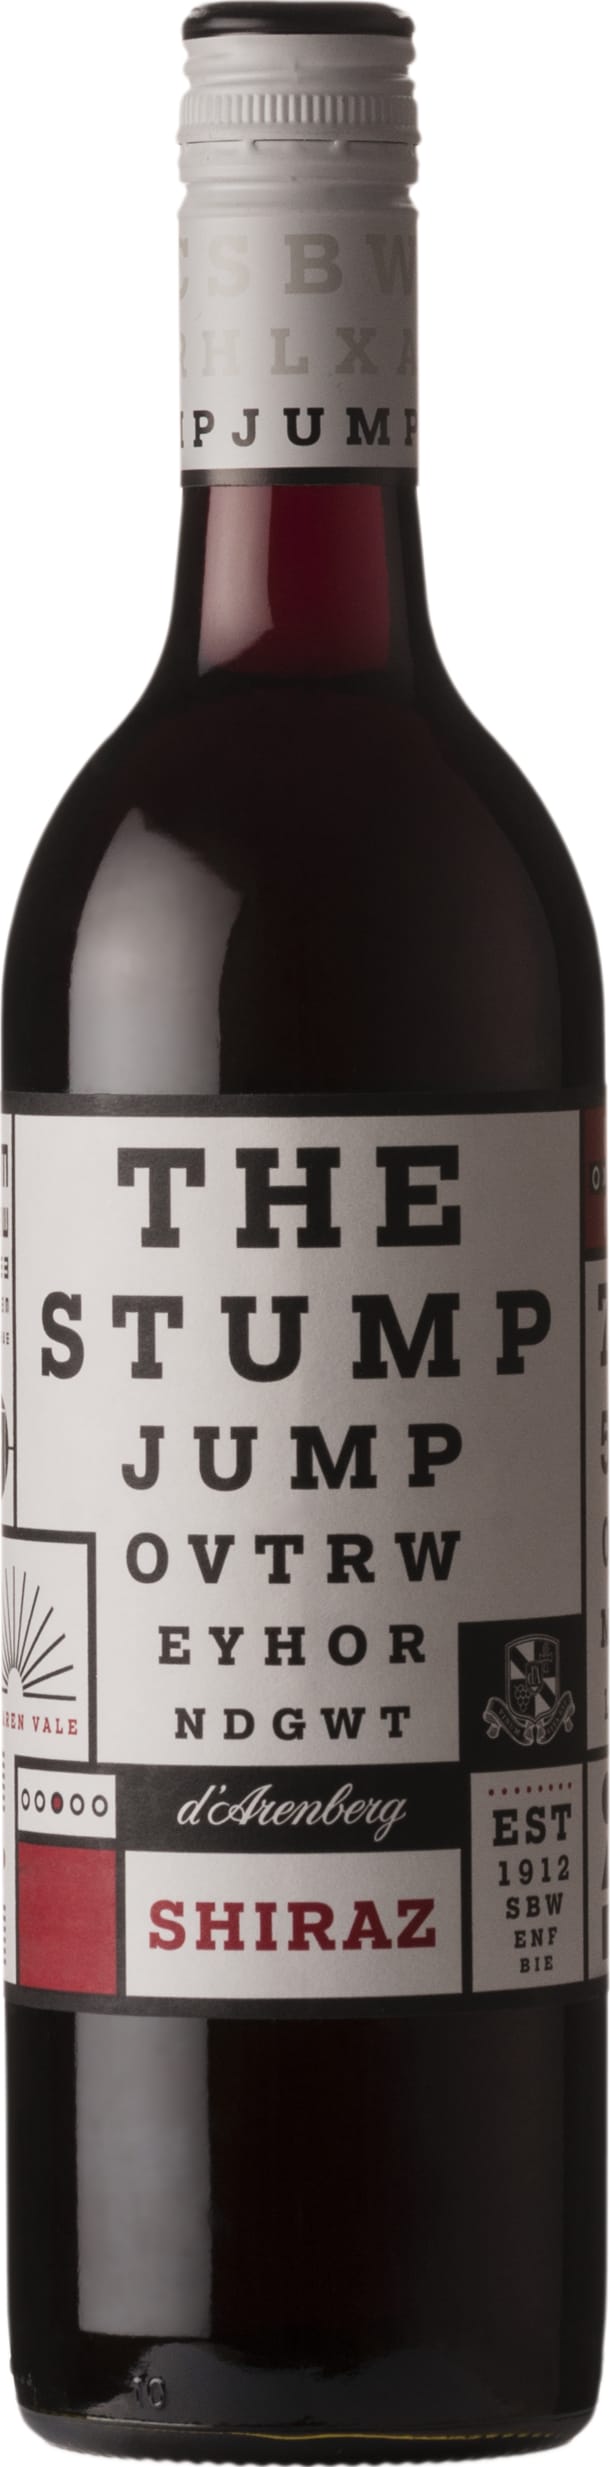 D Arenberg The Stump Jump Shiraz 2020 75cl - Buy D Arenberg Wines from GREAT WINES DIRECT wine shop